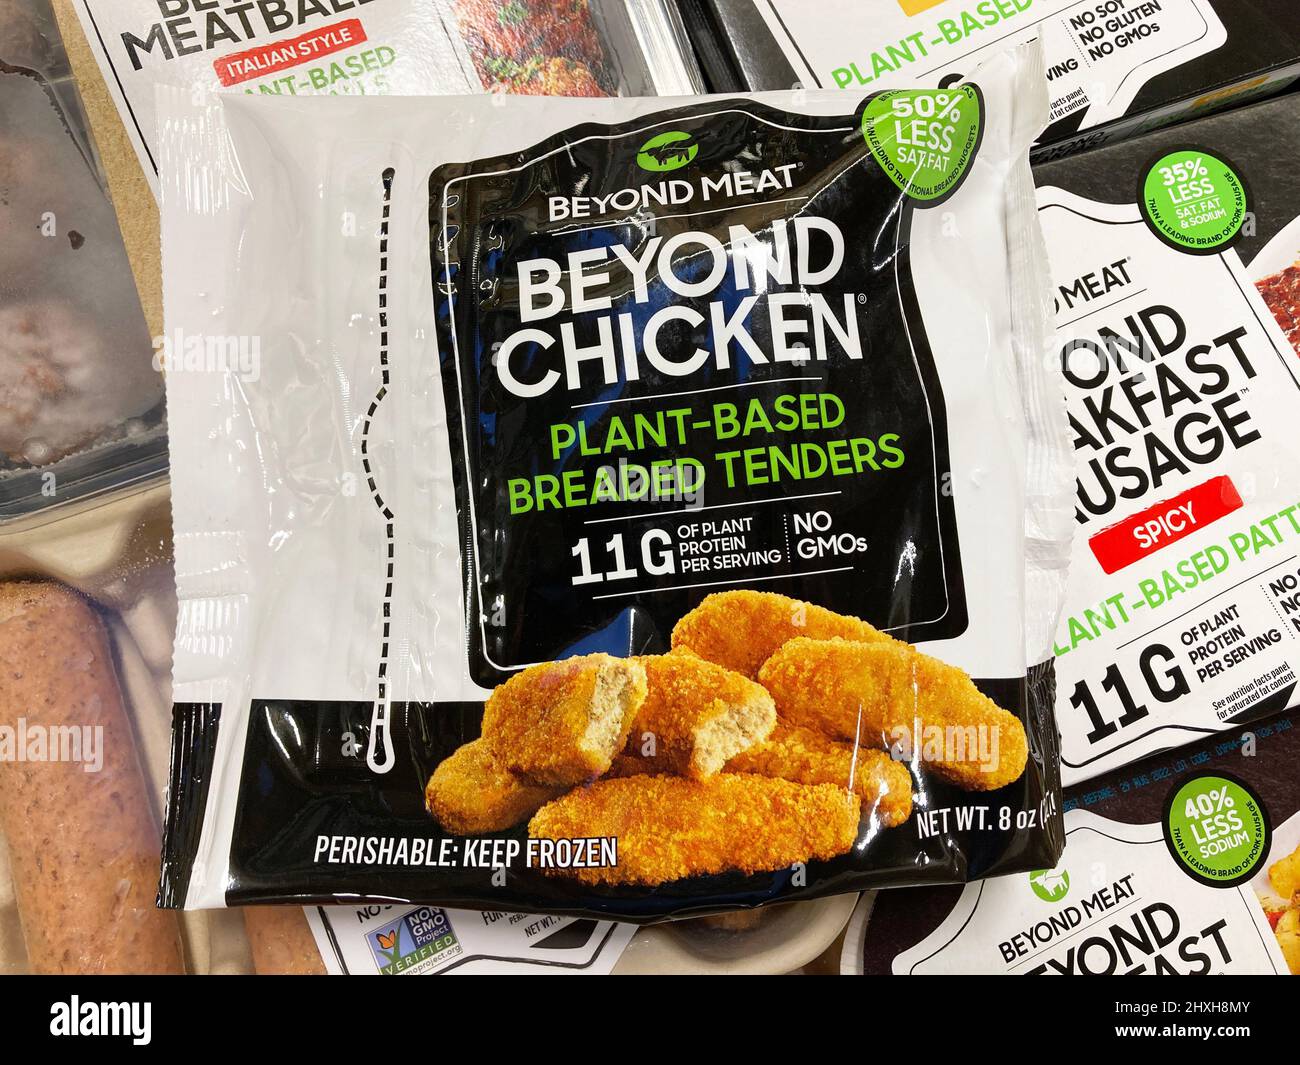 Beyond Chicken plant based breaded tenders by Beyond Meat available for vegan customers on shelves of alternative meat section of grocery store. - San Stock Photo